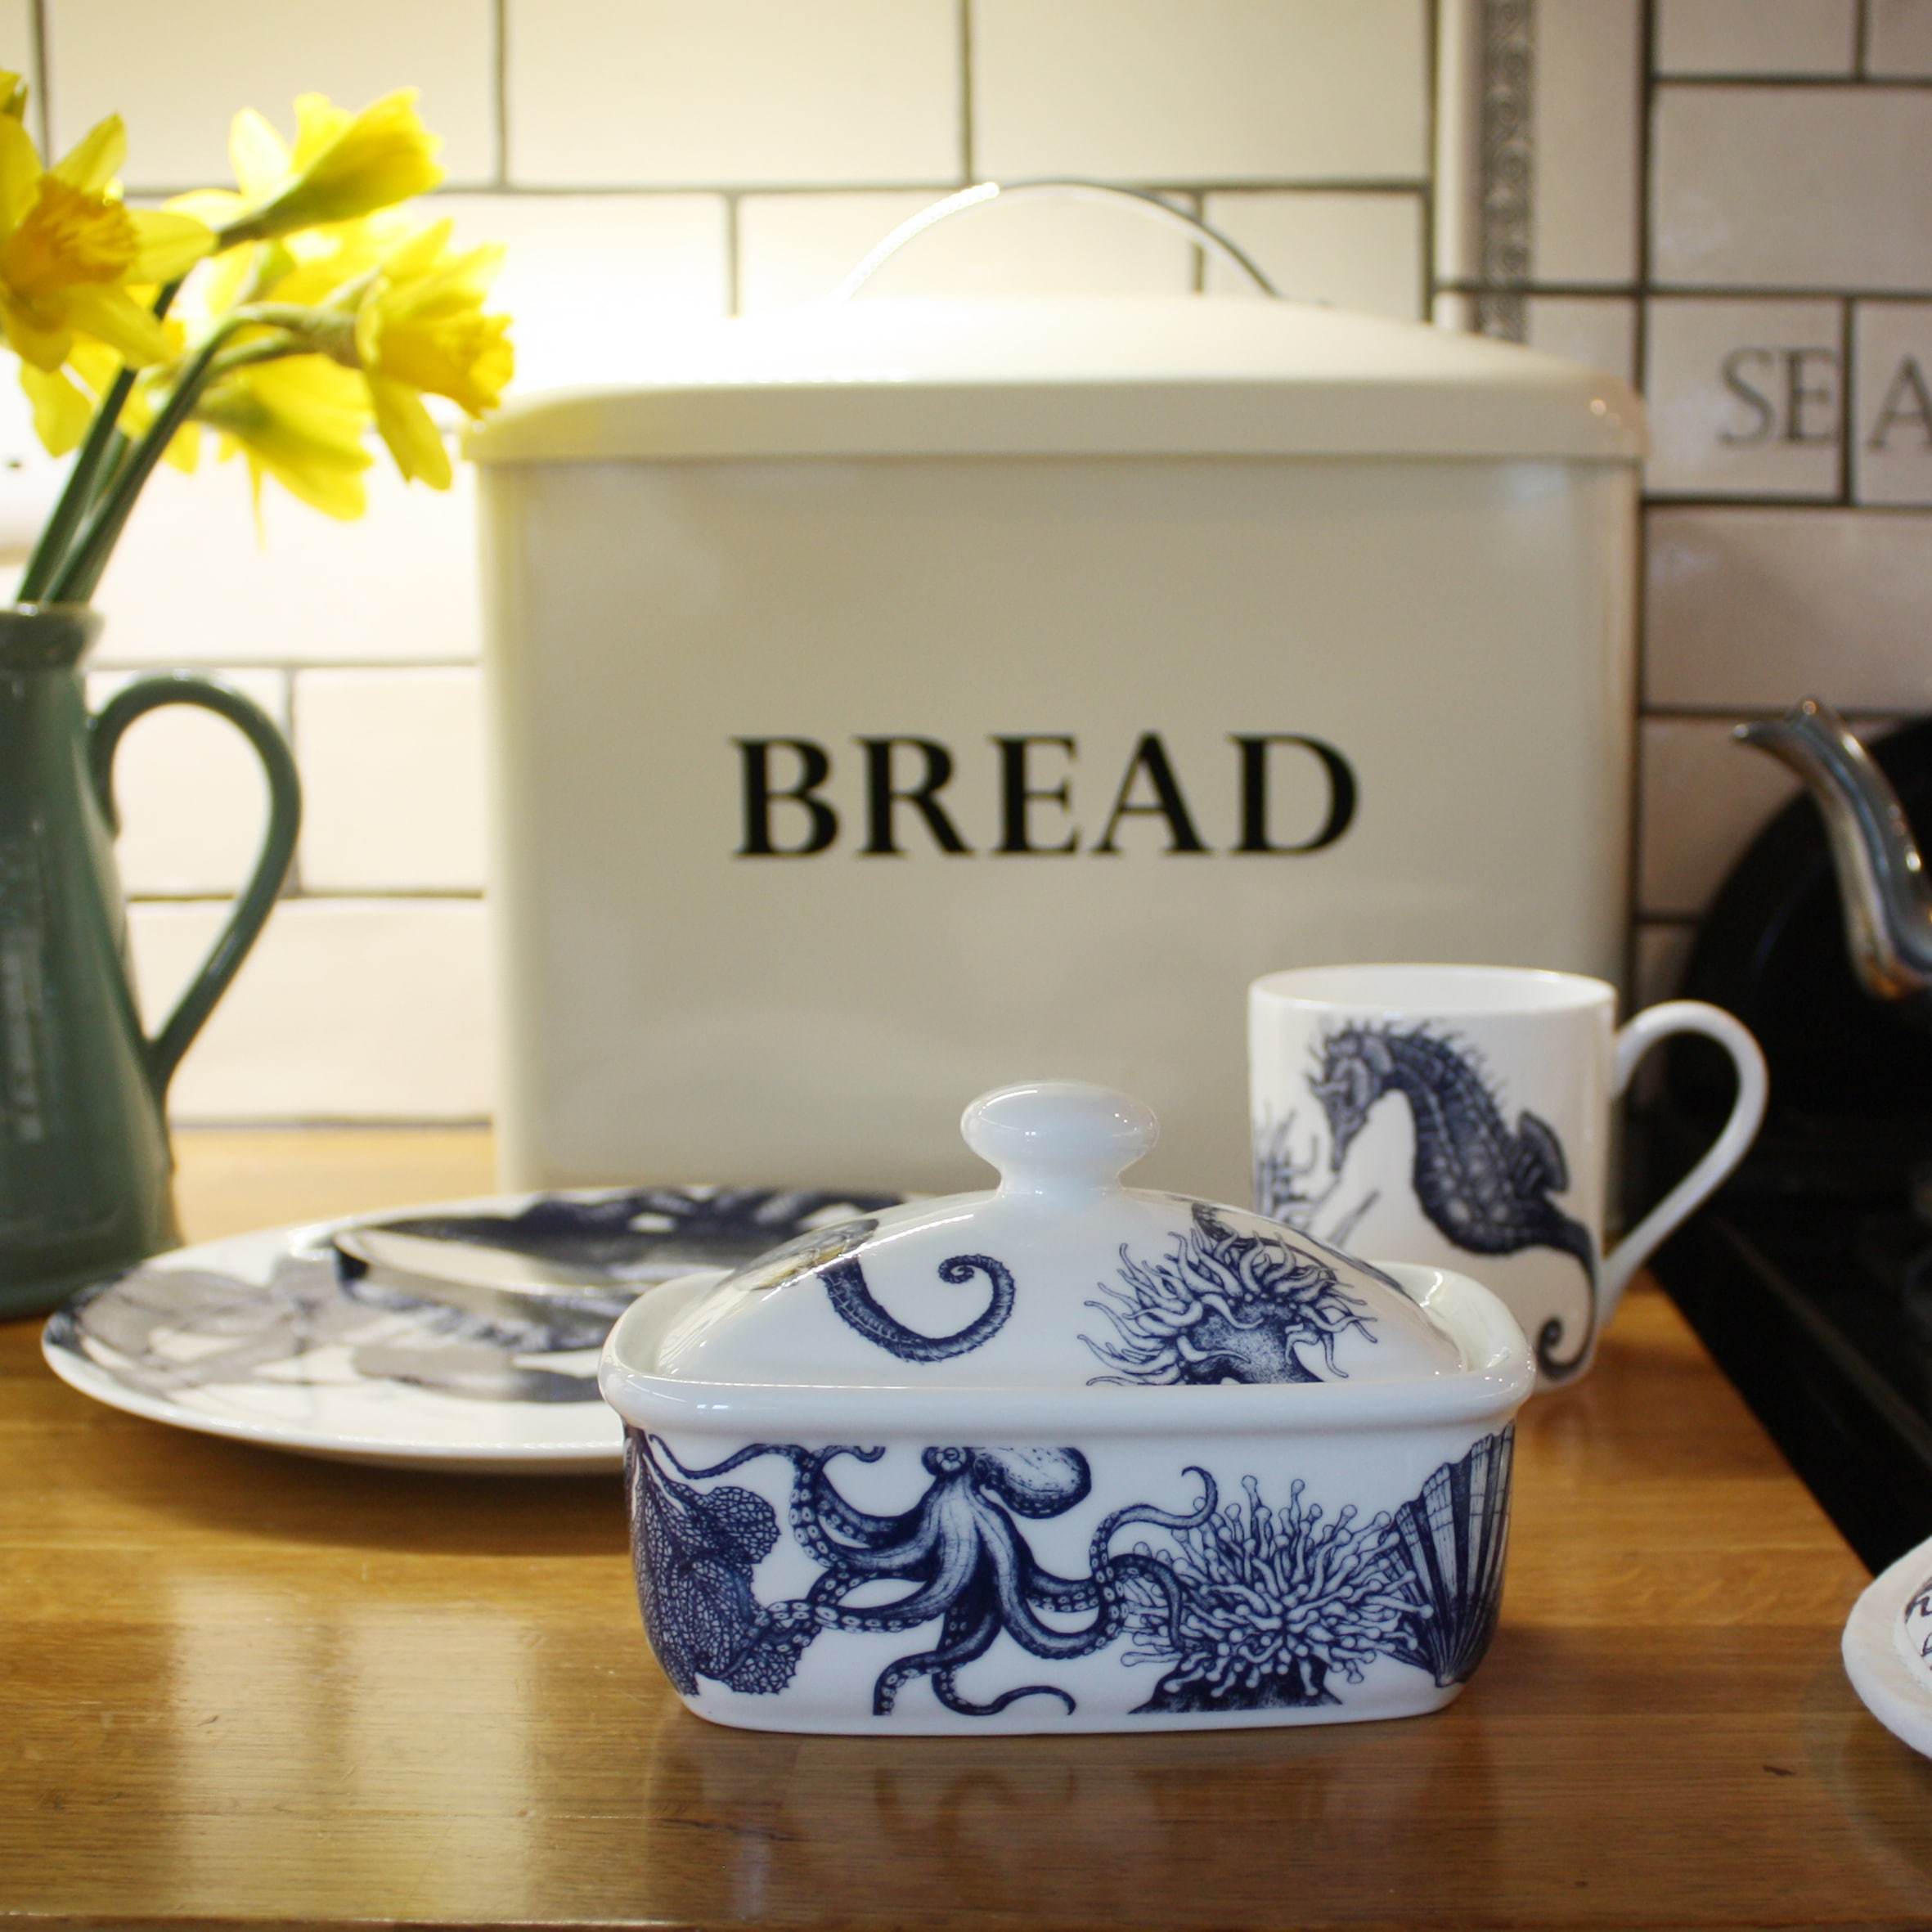 Butter dish in our Classic range,with seahorses,shells,octopus and other sea themed designs all over the base and the lid,placed on a wooden table in front of a bread bin with other matching classic tableware.